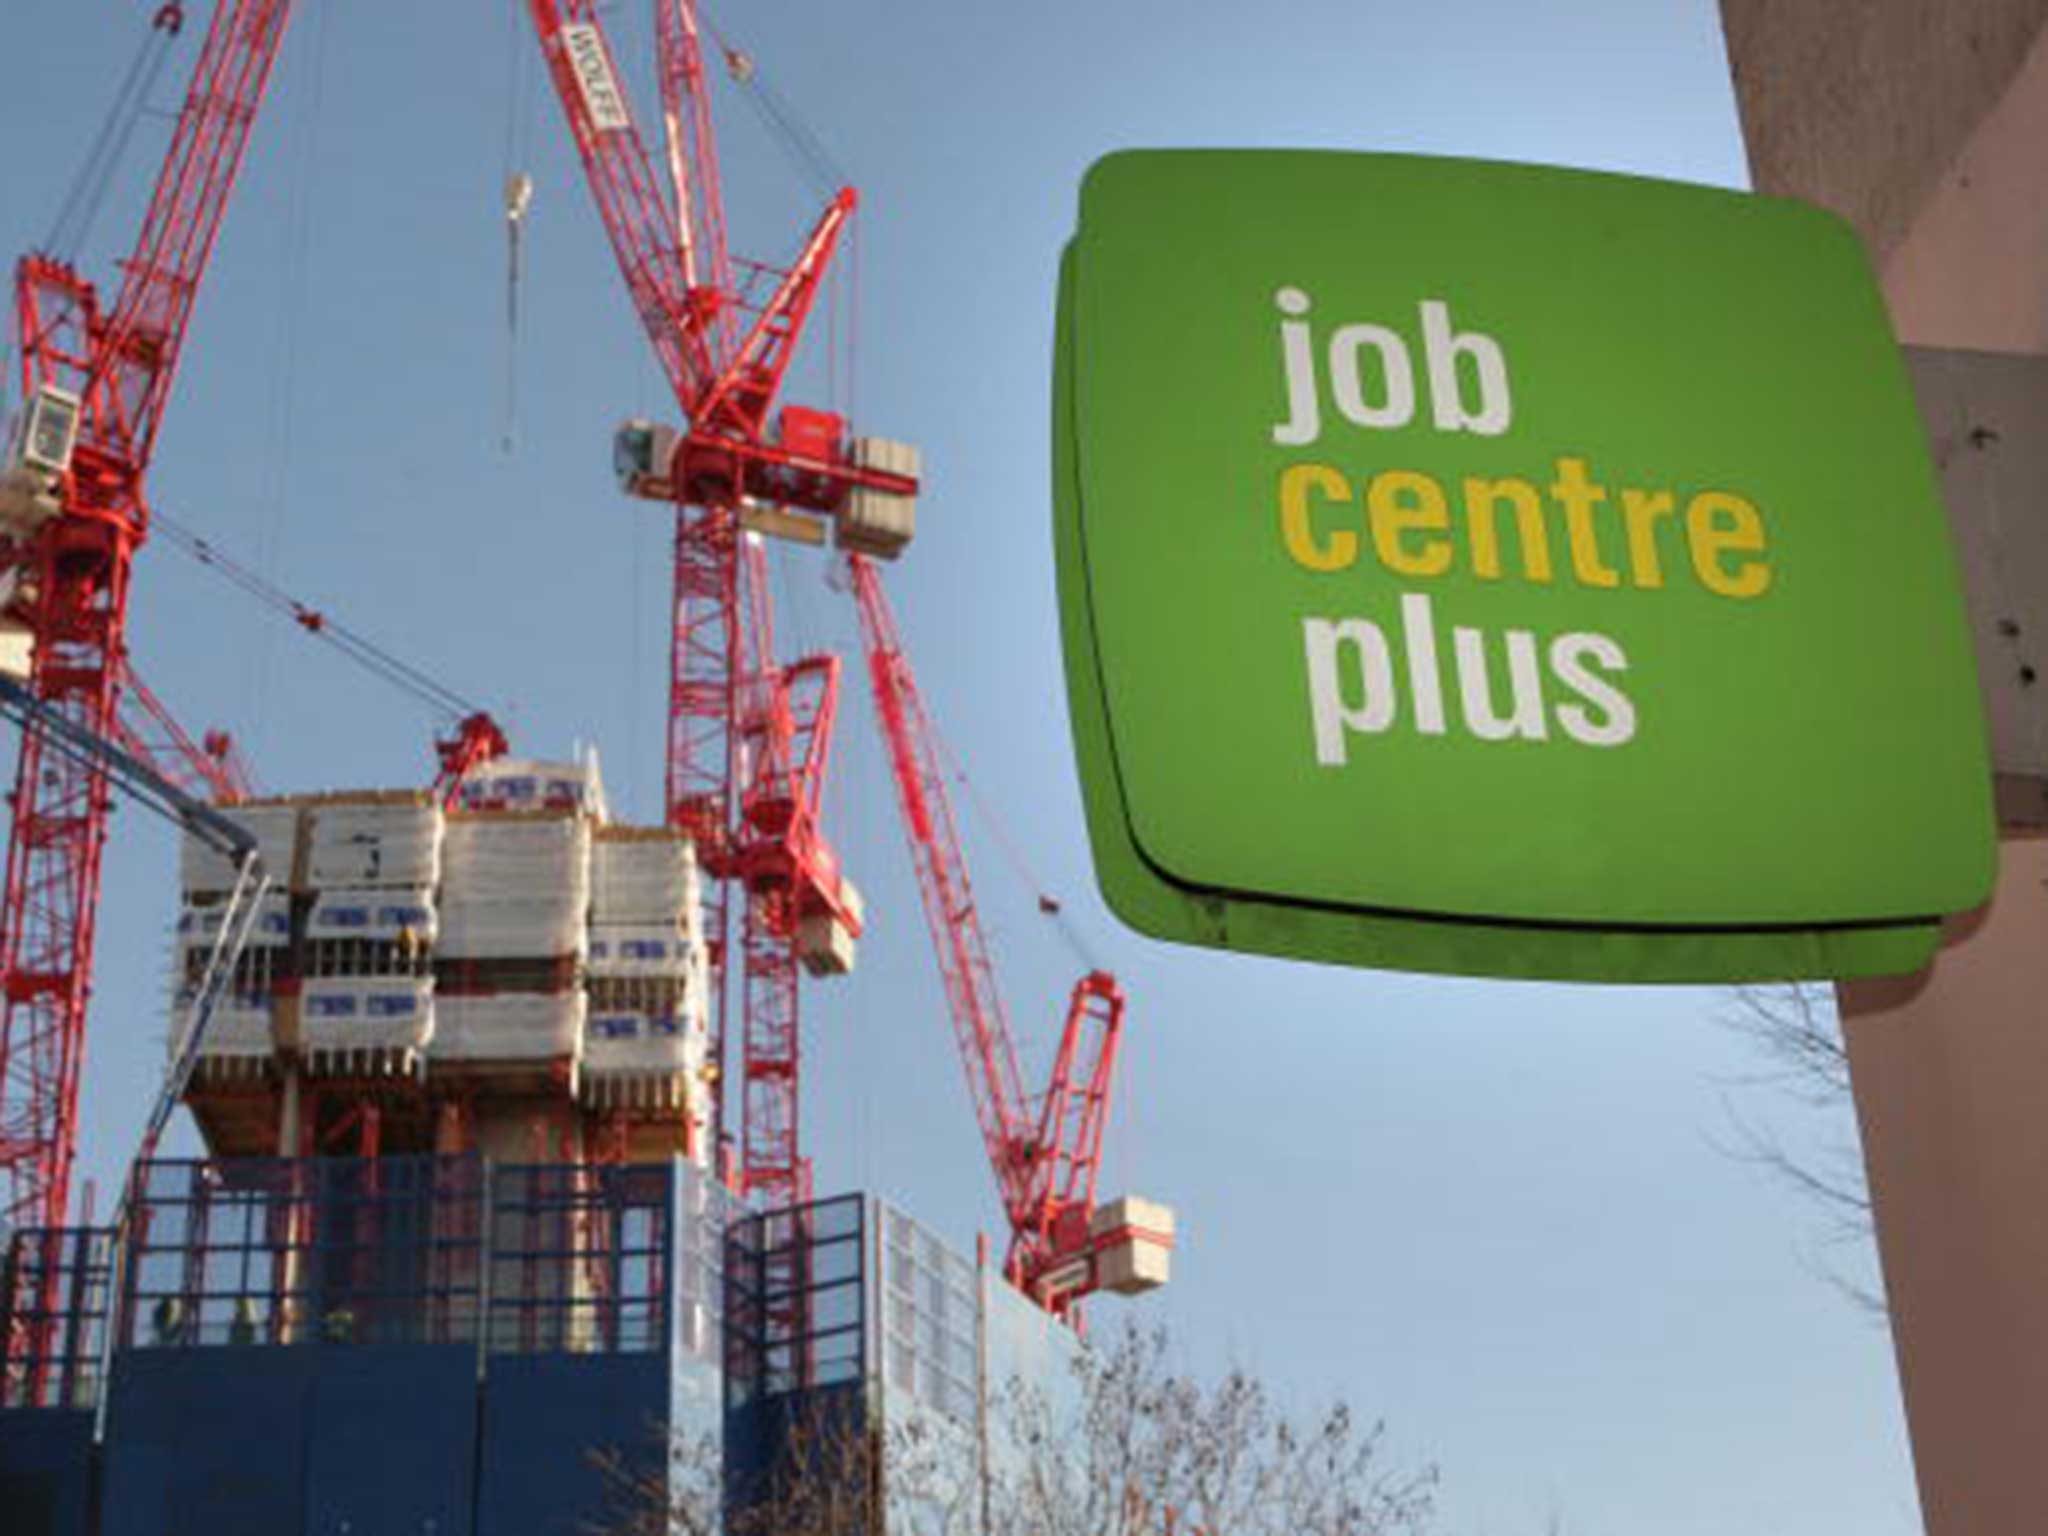 Concerns are growing that Job Centres will soon be getting more clients